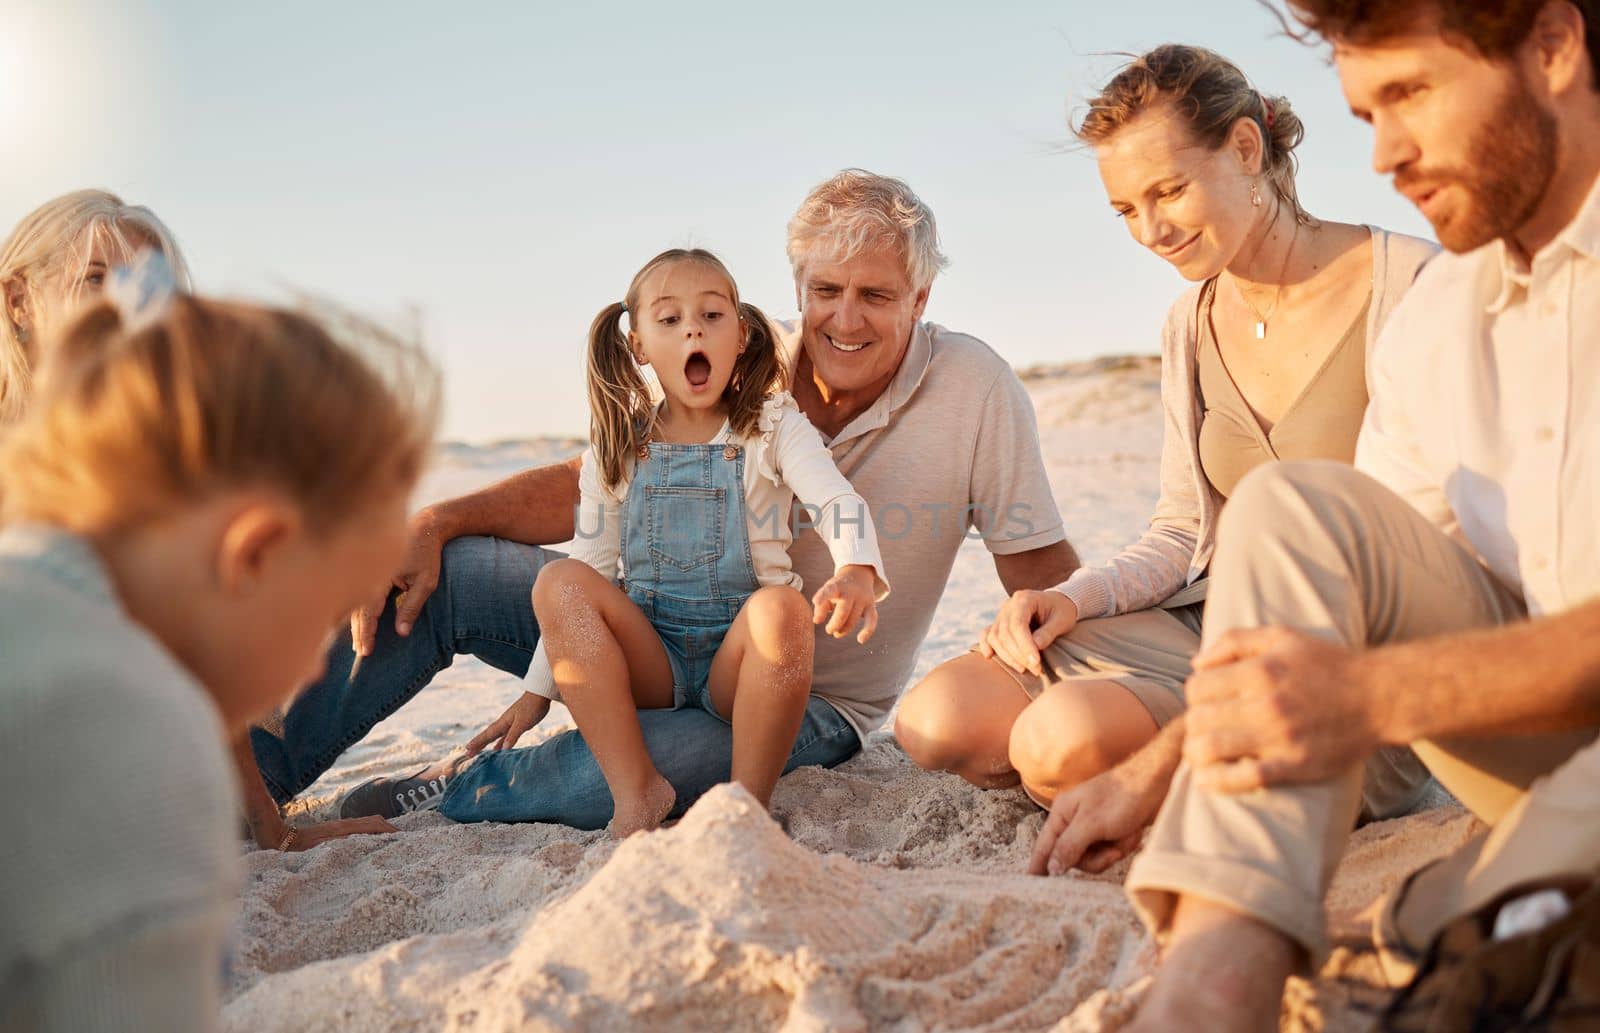 Parents building a sandcastle with their children. Family enjoying a beach holiday together. Little girls playing with their family on the beach. Carefree family bonding during vacation together.